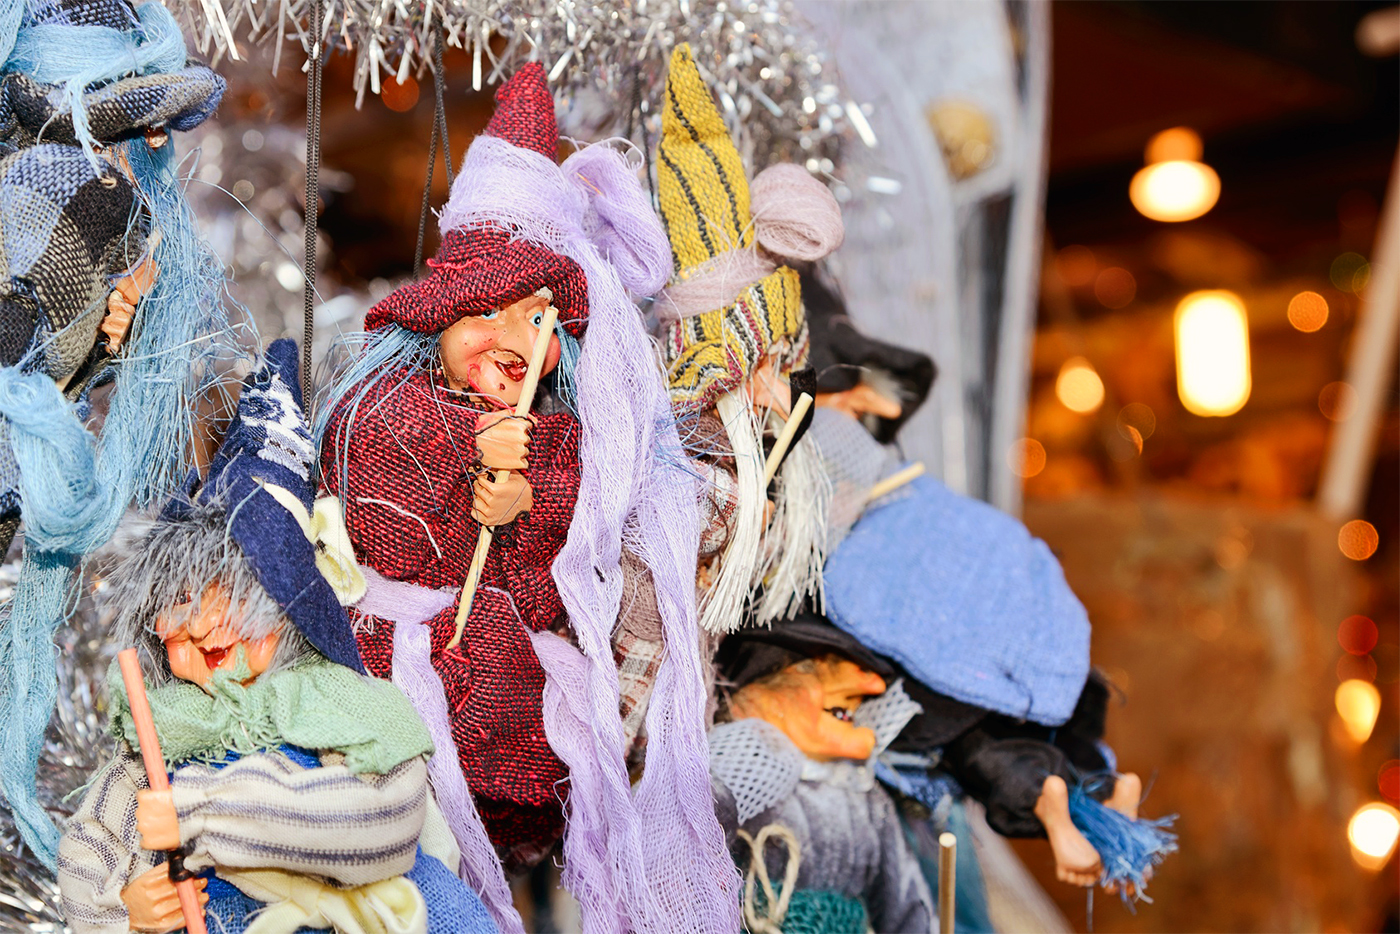 Traditional markets on the occasion of the Befana in Piazza Navona